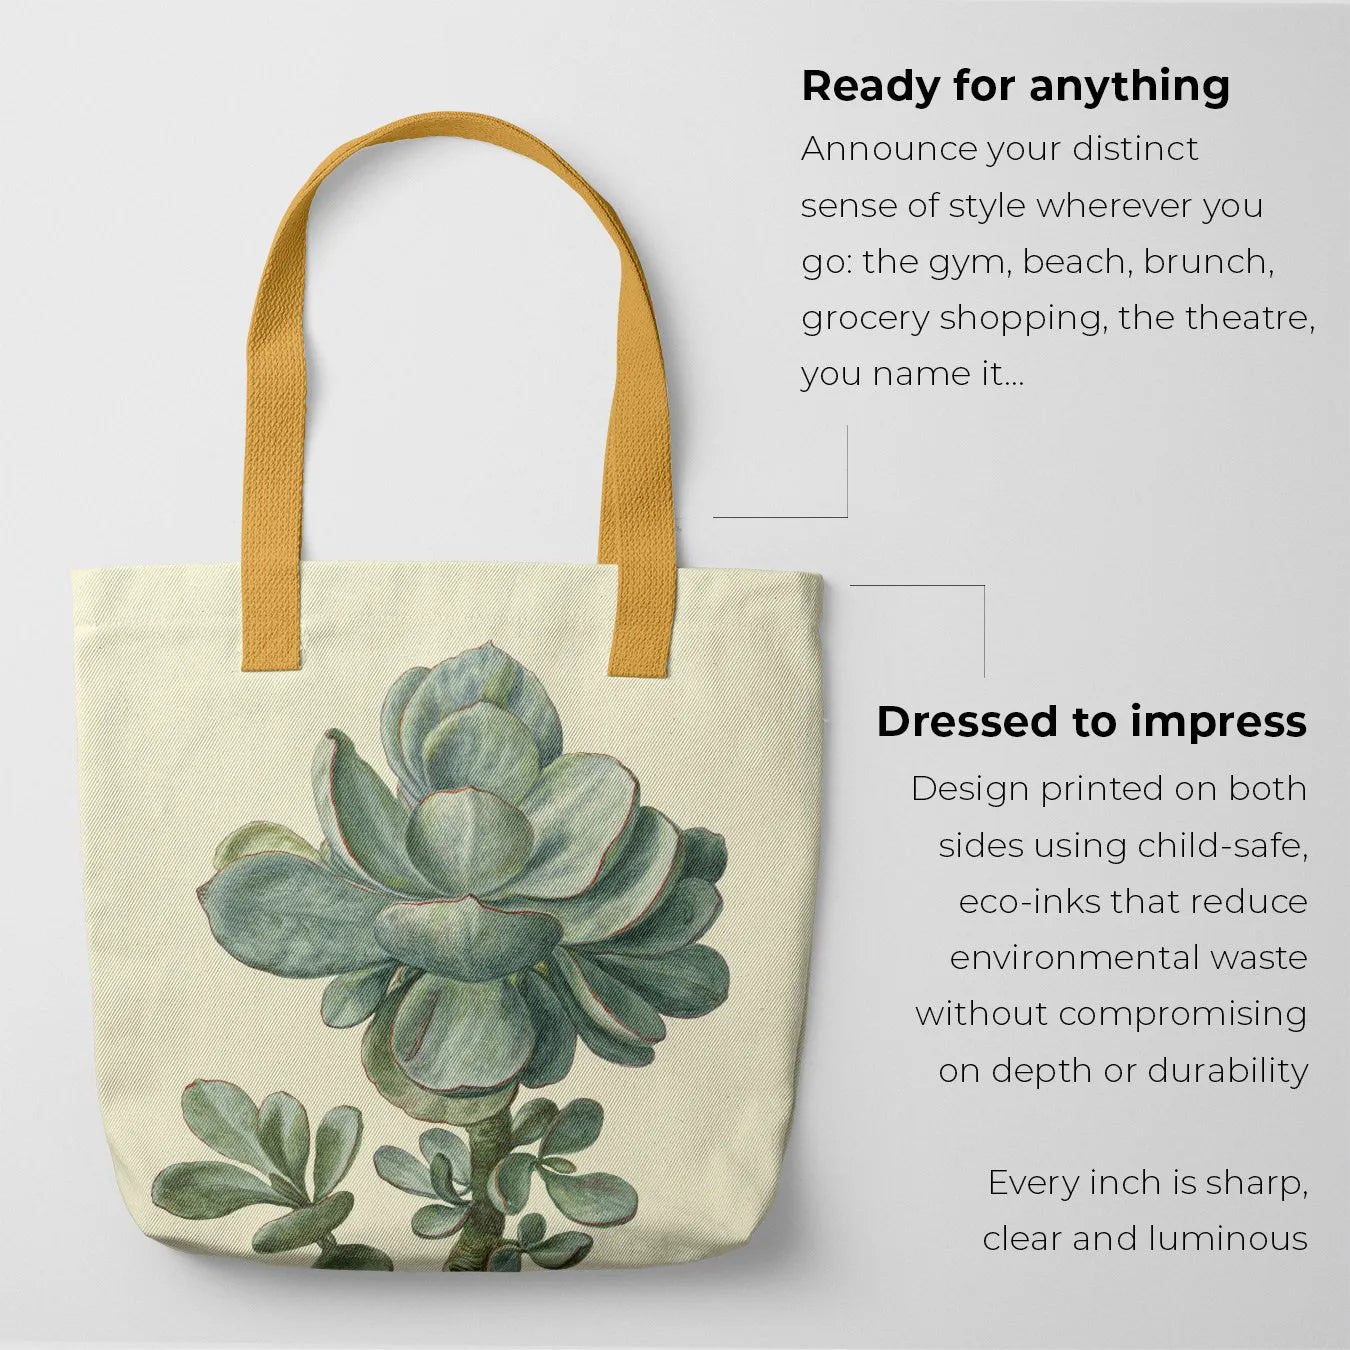 Little Green Man Tote - New Dawn - Heavy Duty Reusable Grocery Bag - Shopping Totes - Aesthetic Art